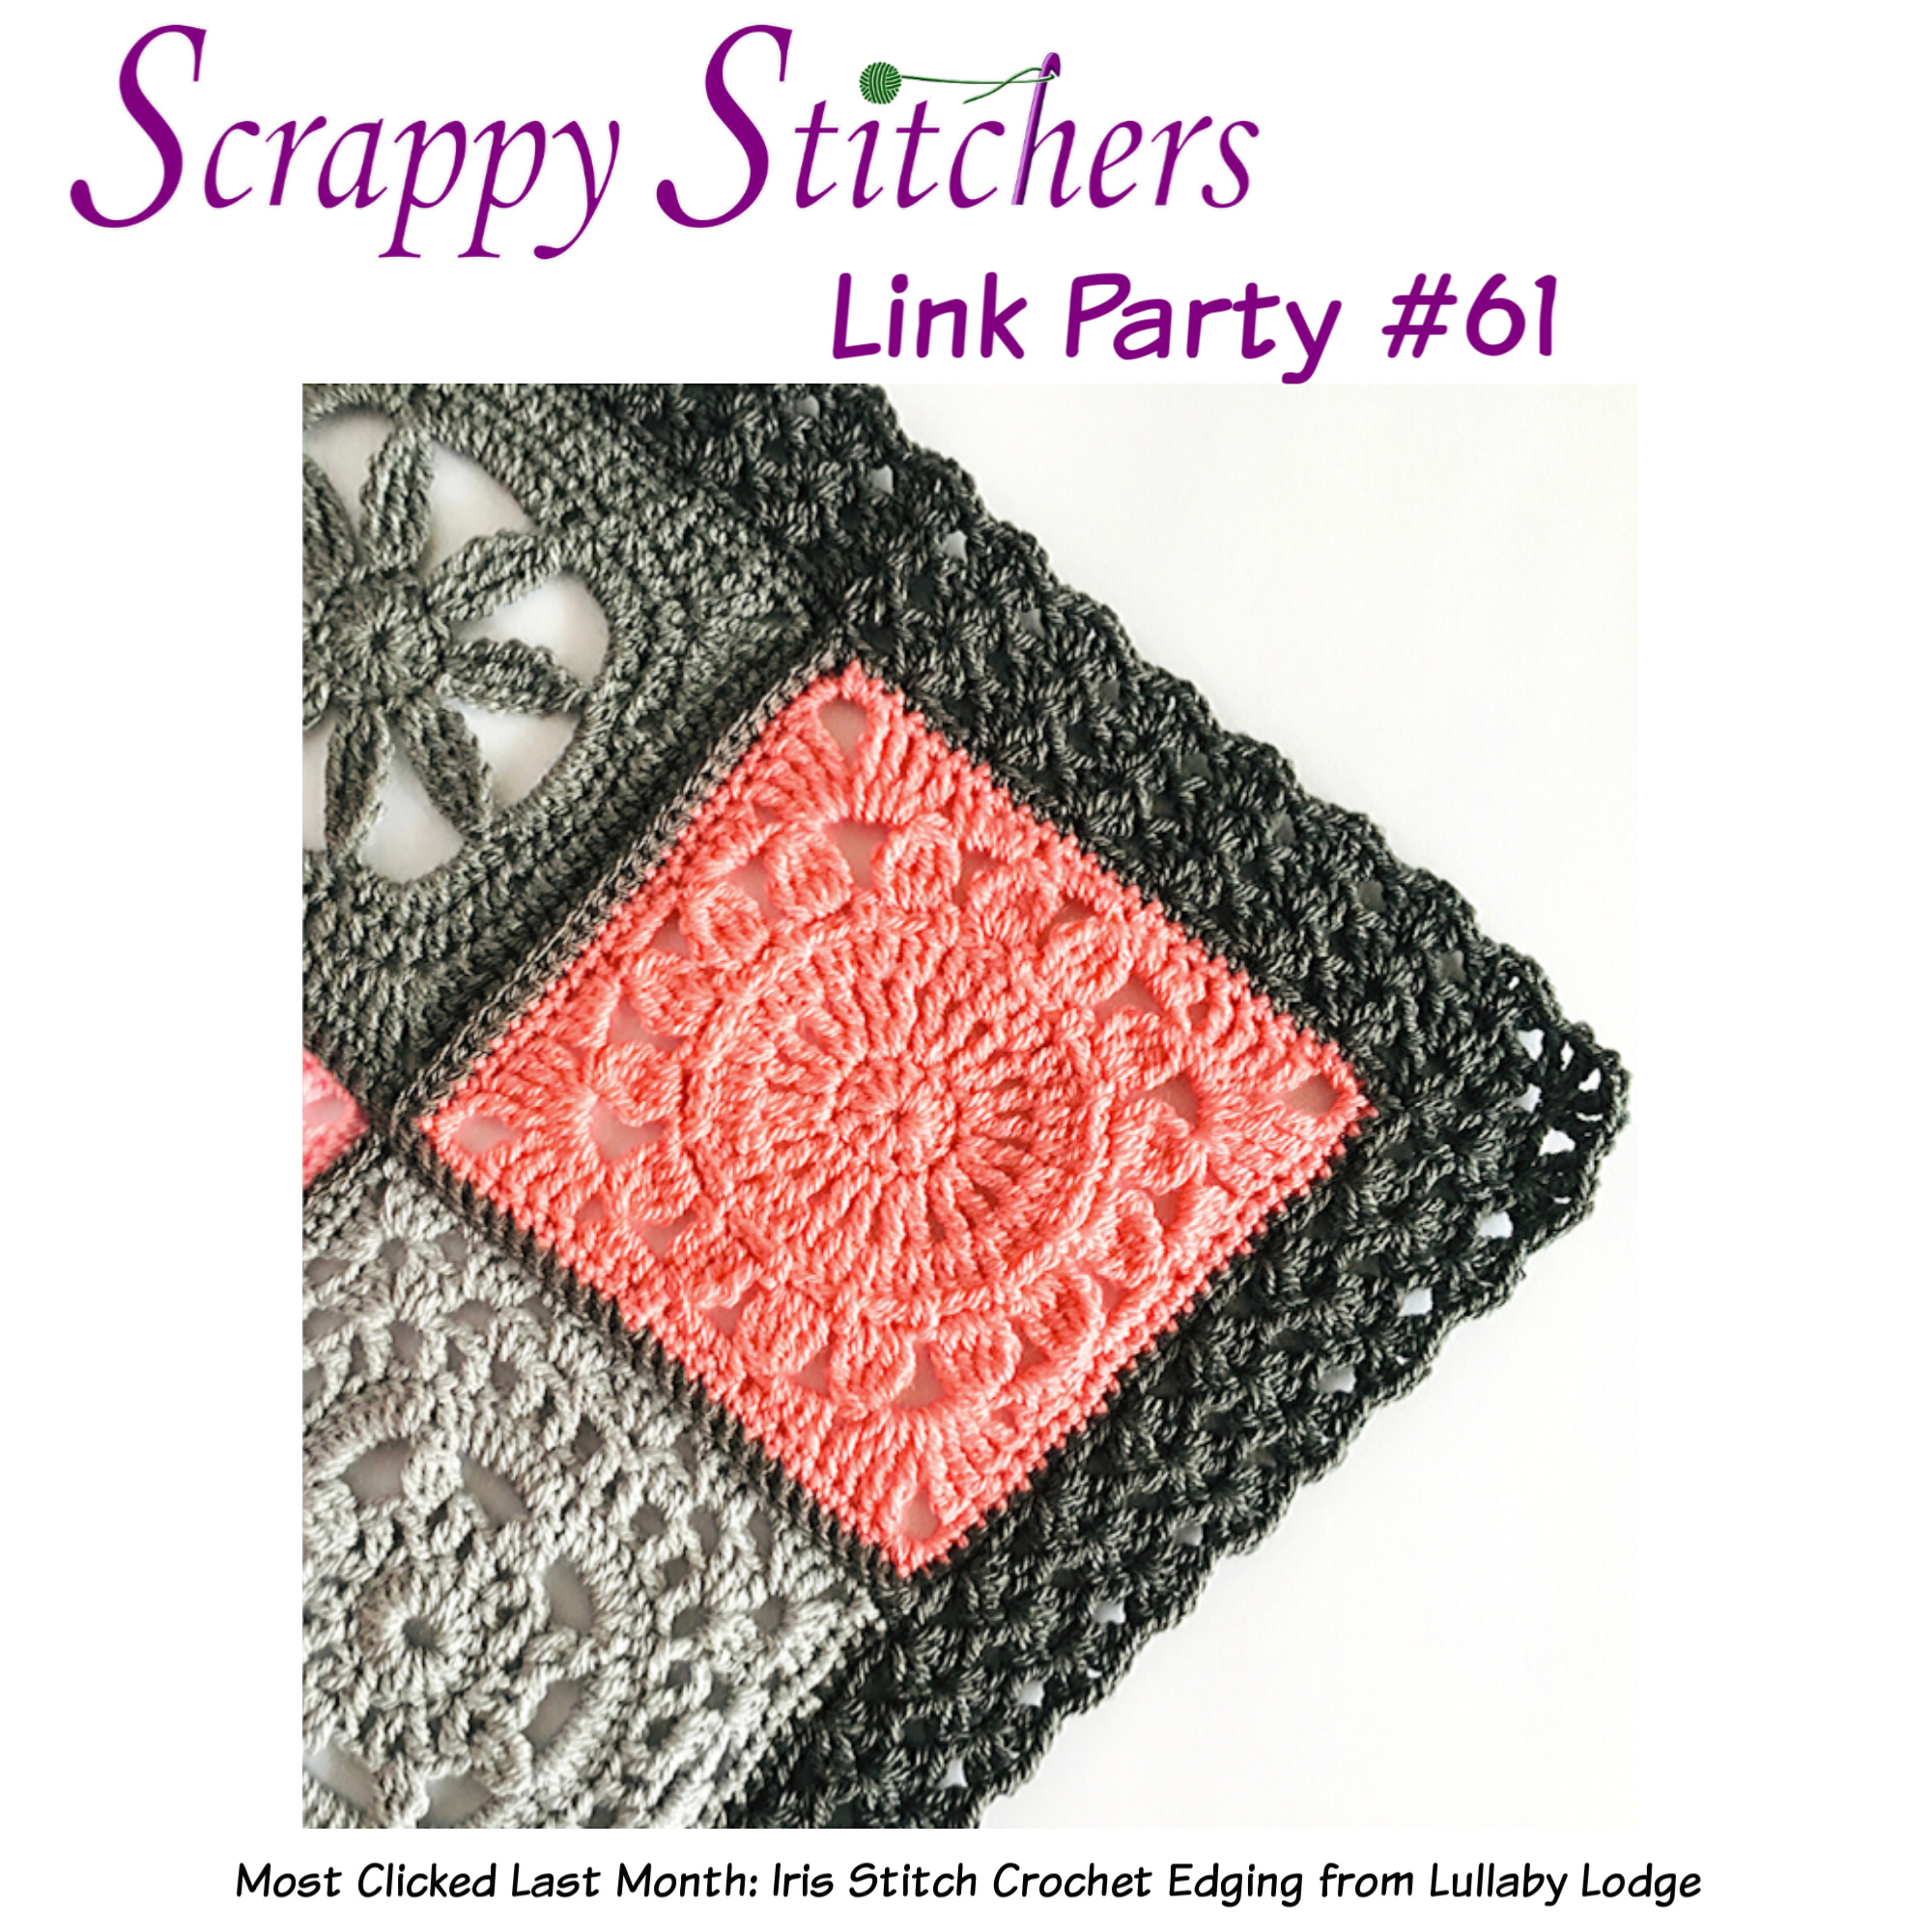 Scrappy Stitchers Link Party 61 - March 2020 - most clicked last month Iris Stitch Crochet Edging from Lullaby Lodge